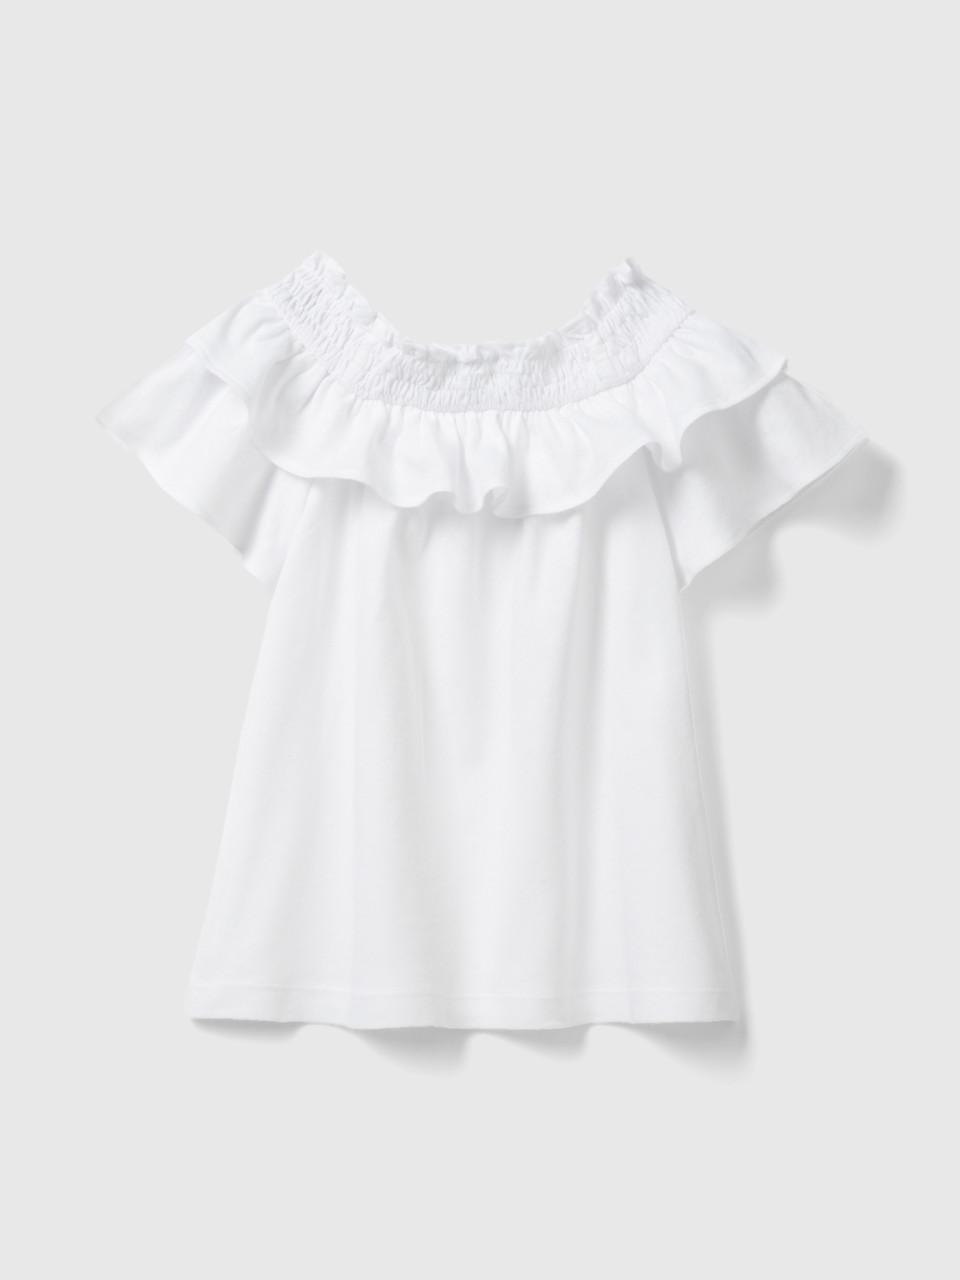 Benetton, T-shirt With Boat Neck, White, Kids